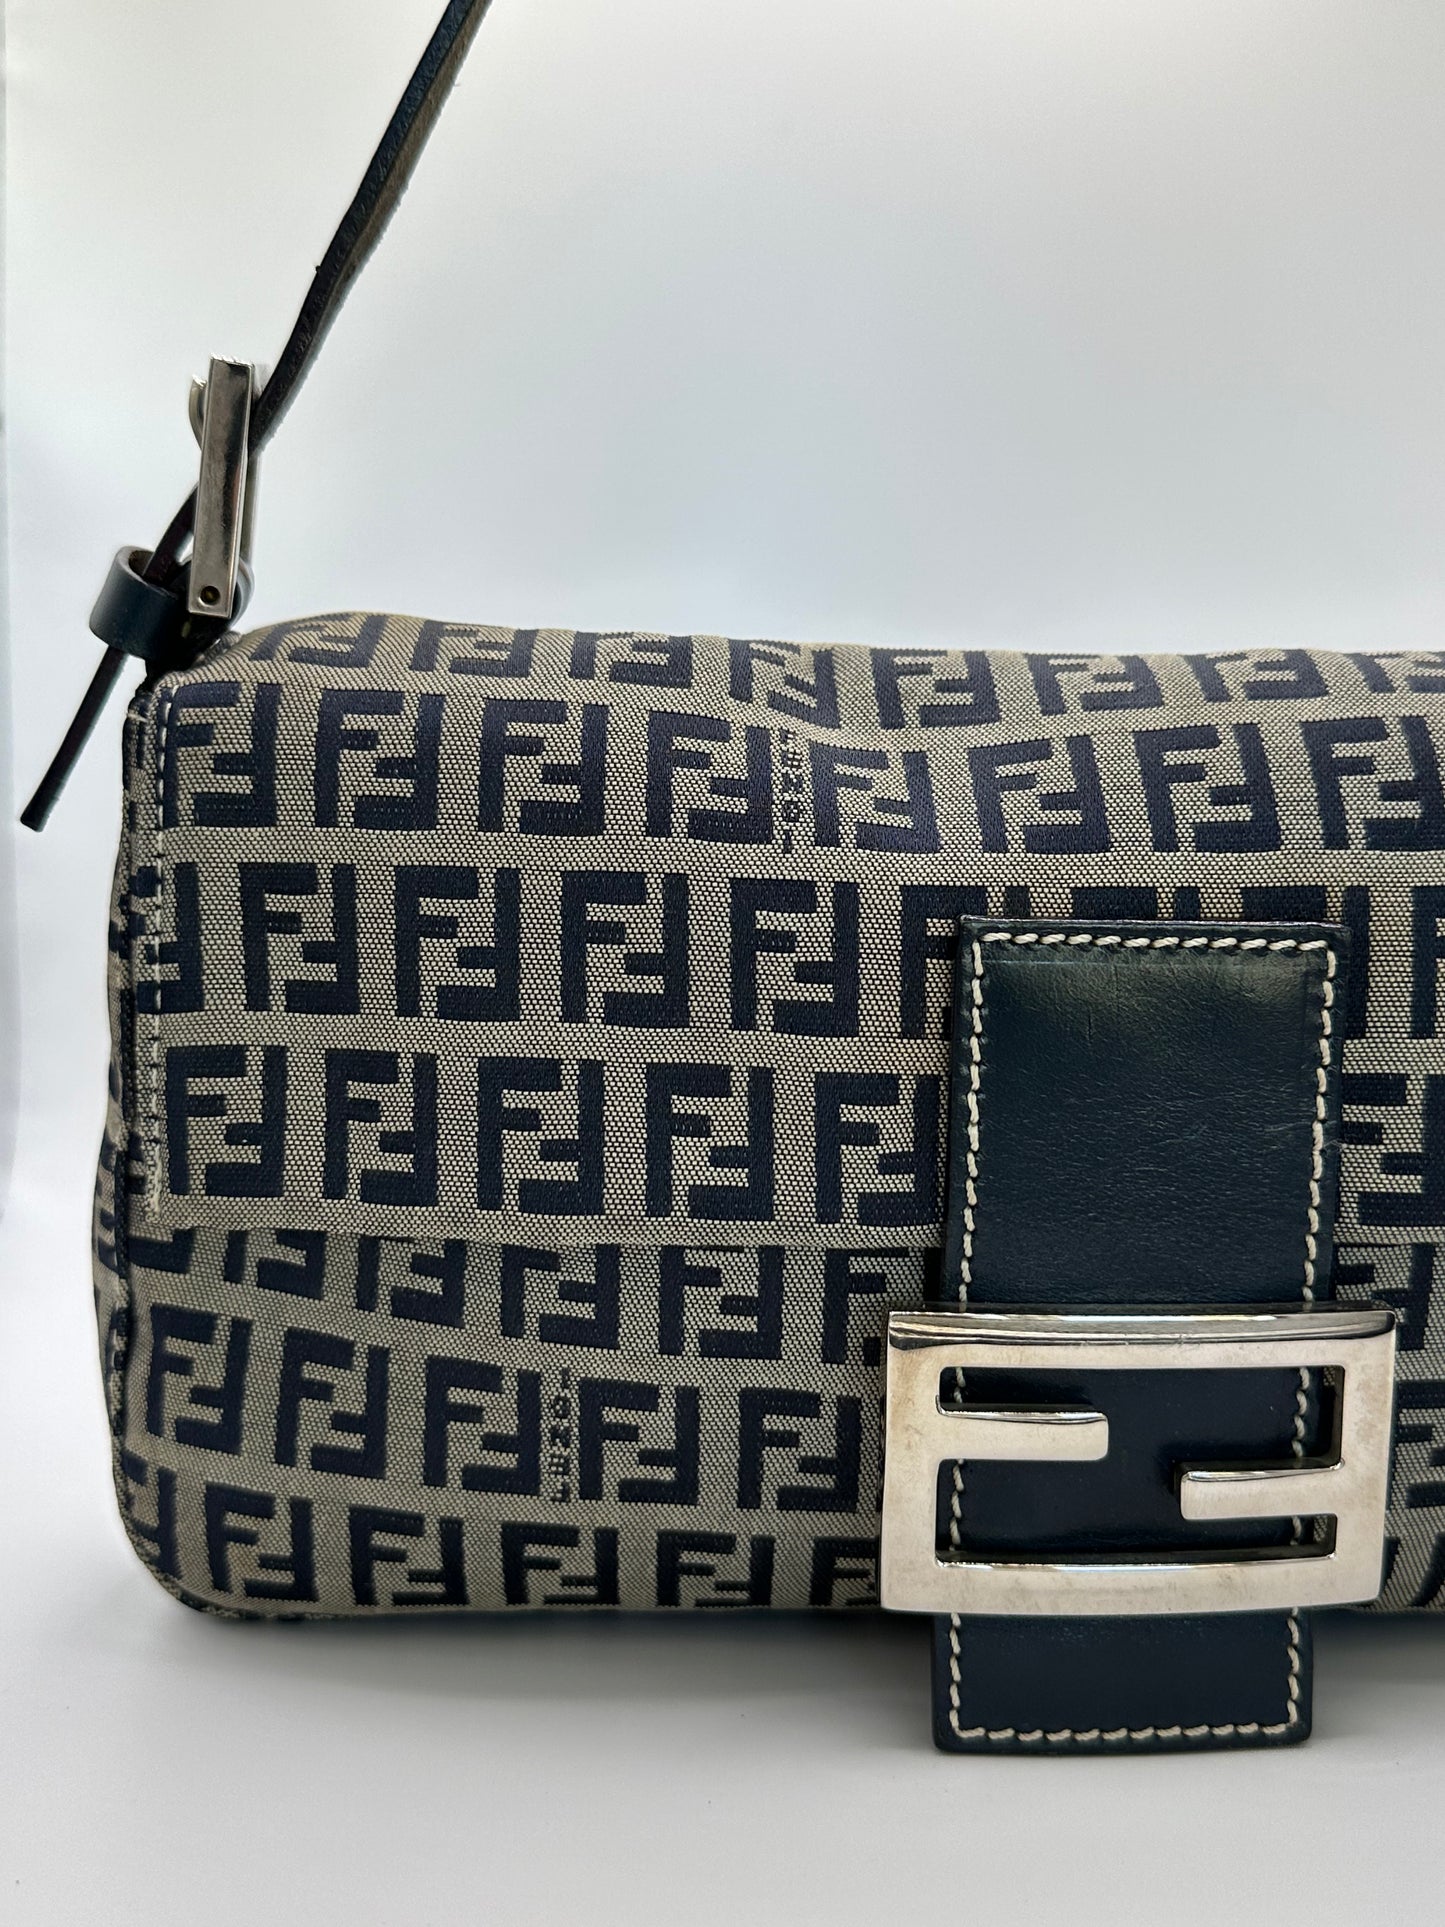 Vintage fendi baguette in navy colour with silver hardware up close photo